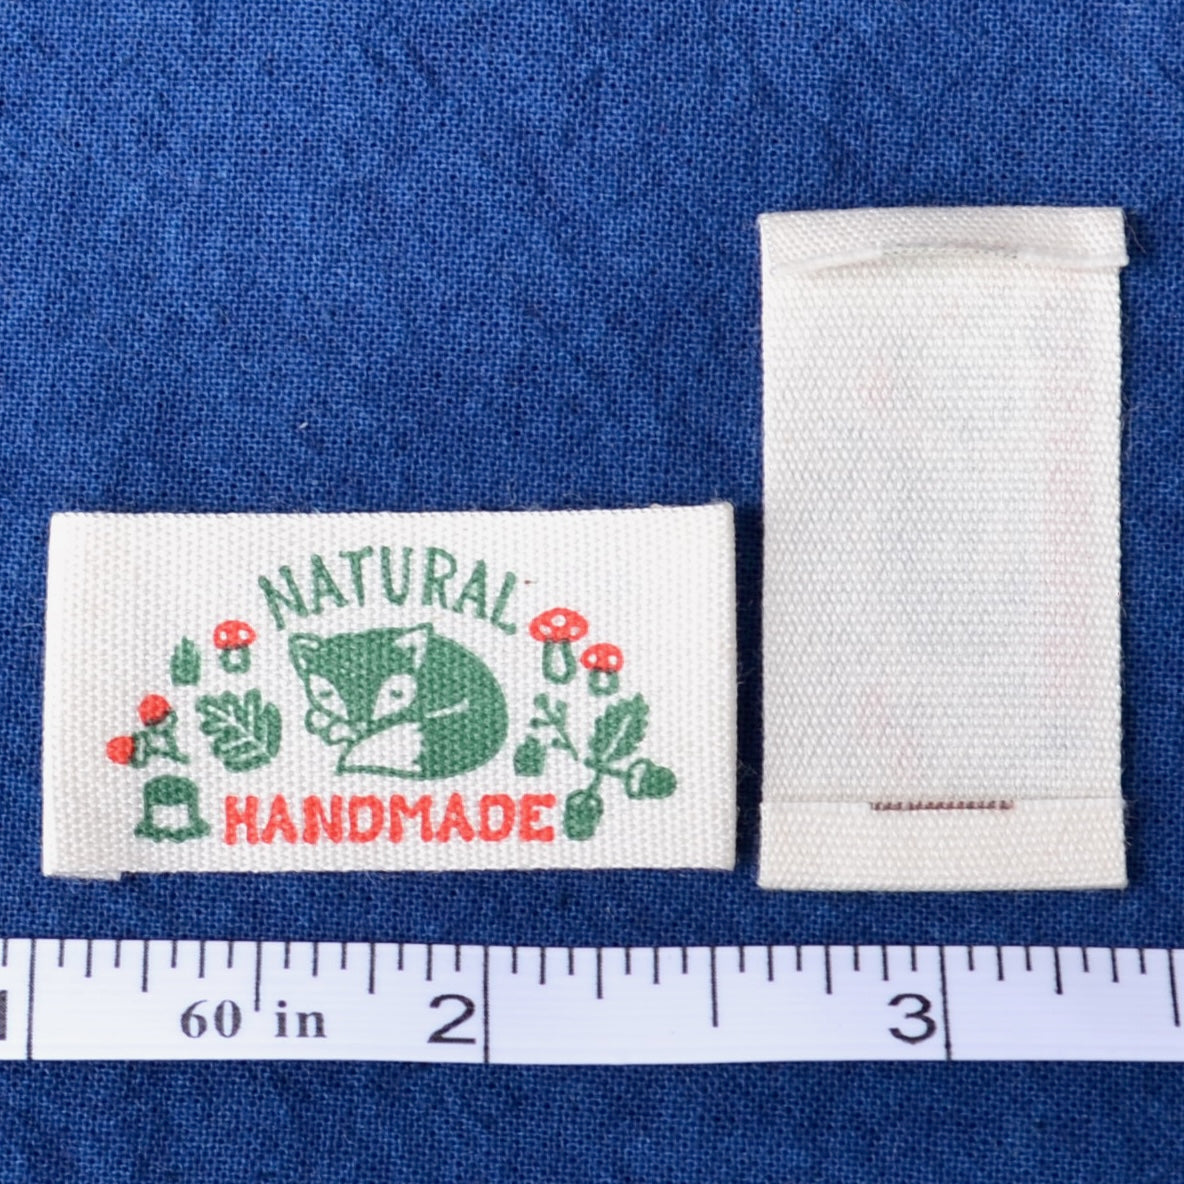 Cotton Label - Natural Handmade Fox with StrawberriesSew-in Label Natural Handmade Fox with Strawberries